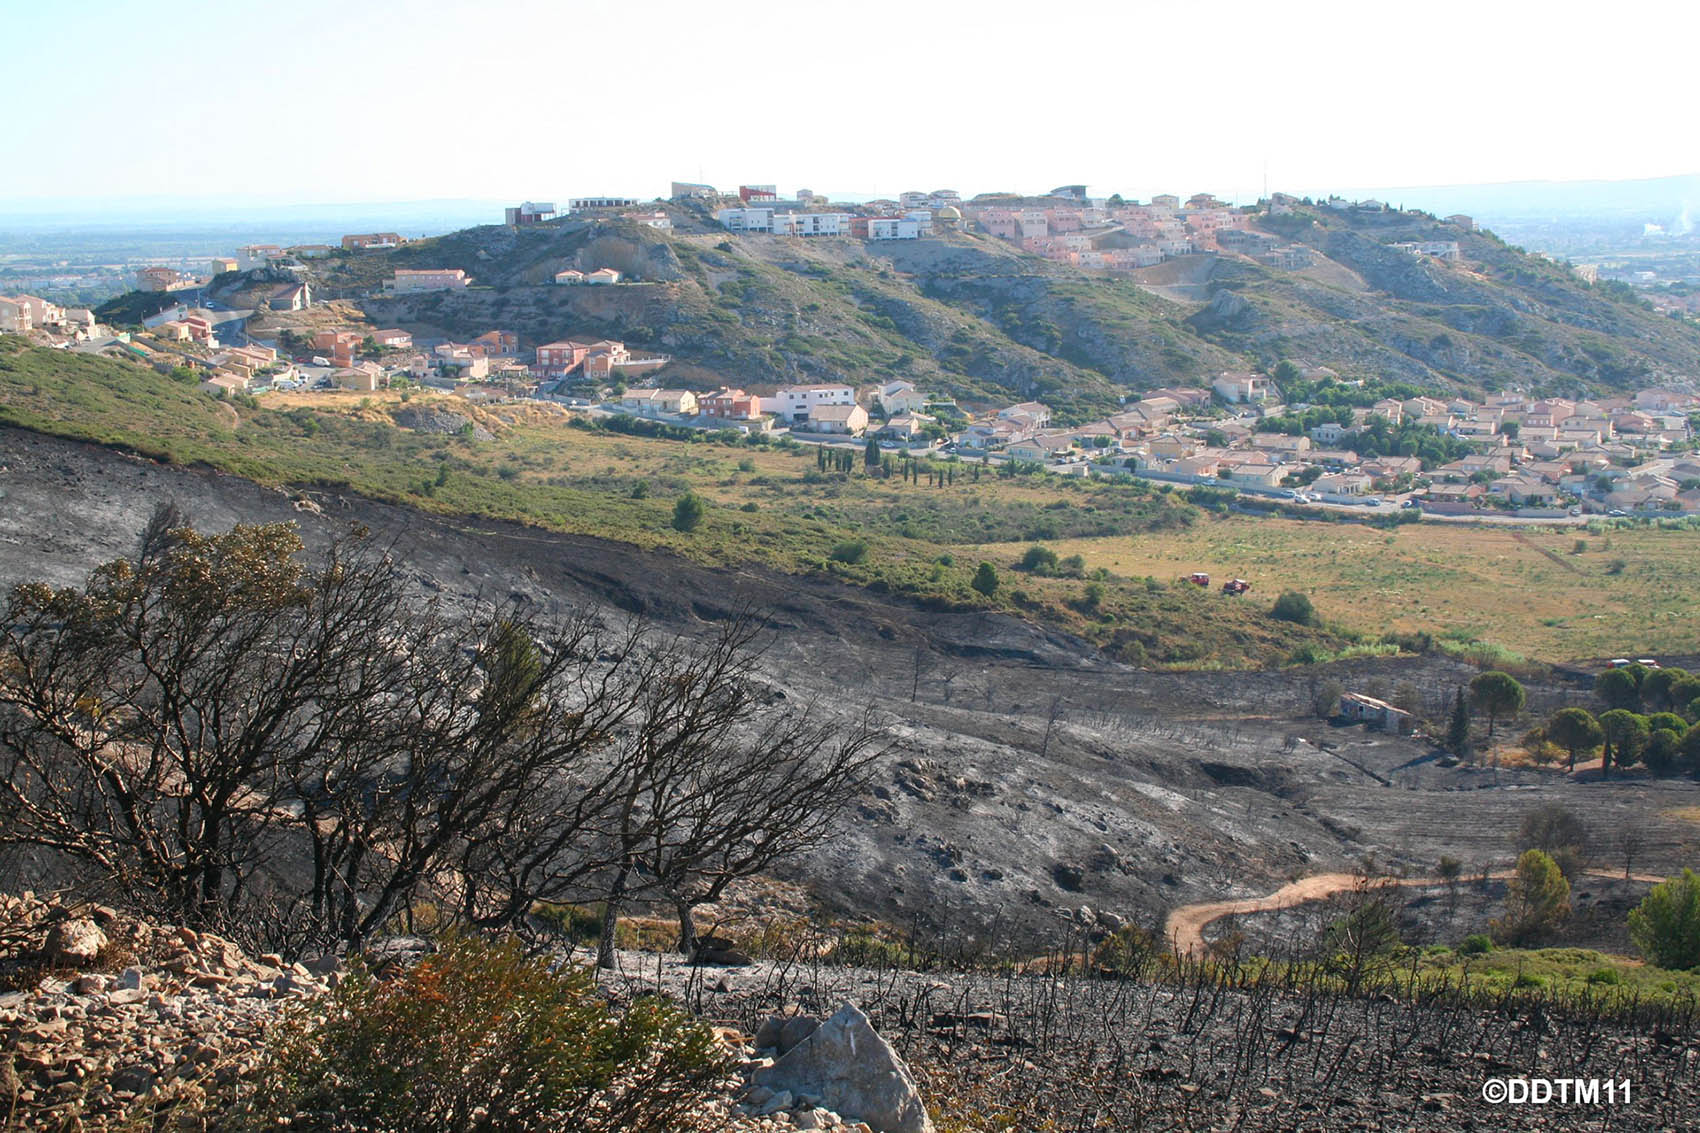 Scrubland fire on the outskirts of the city of Narbonne.